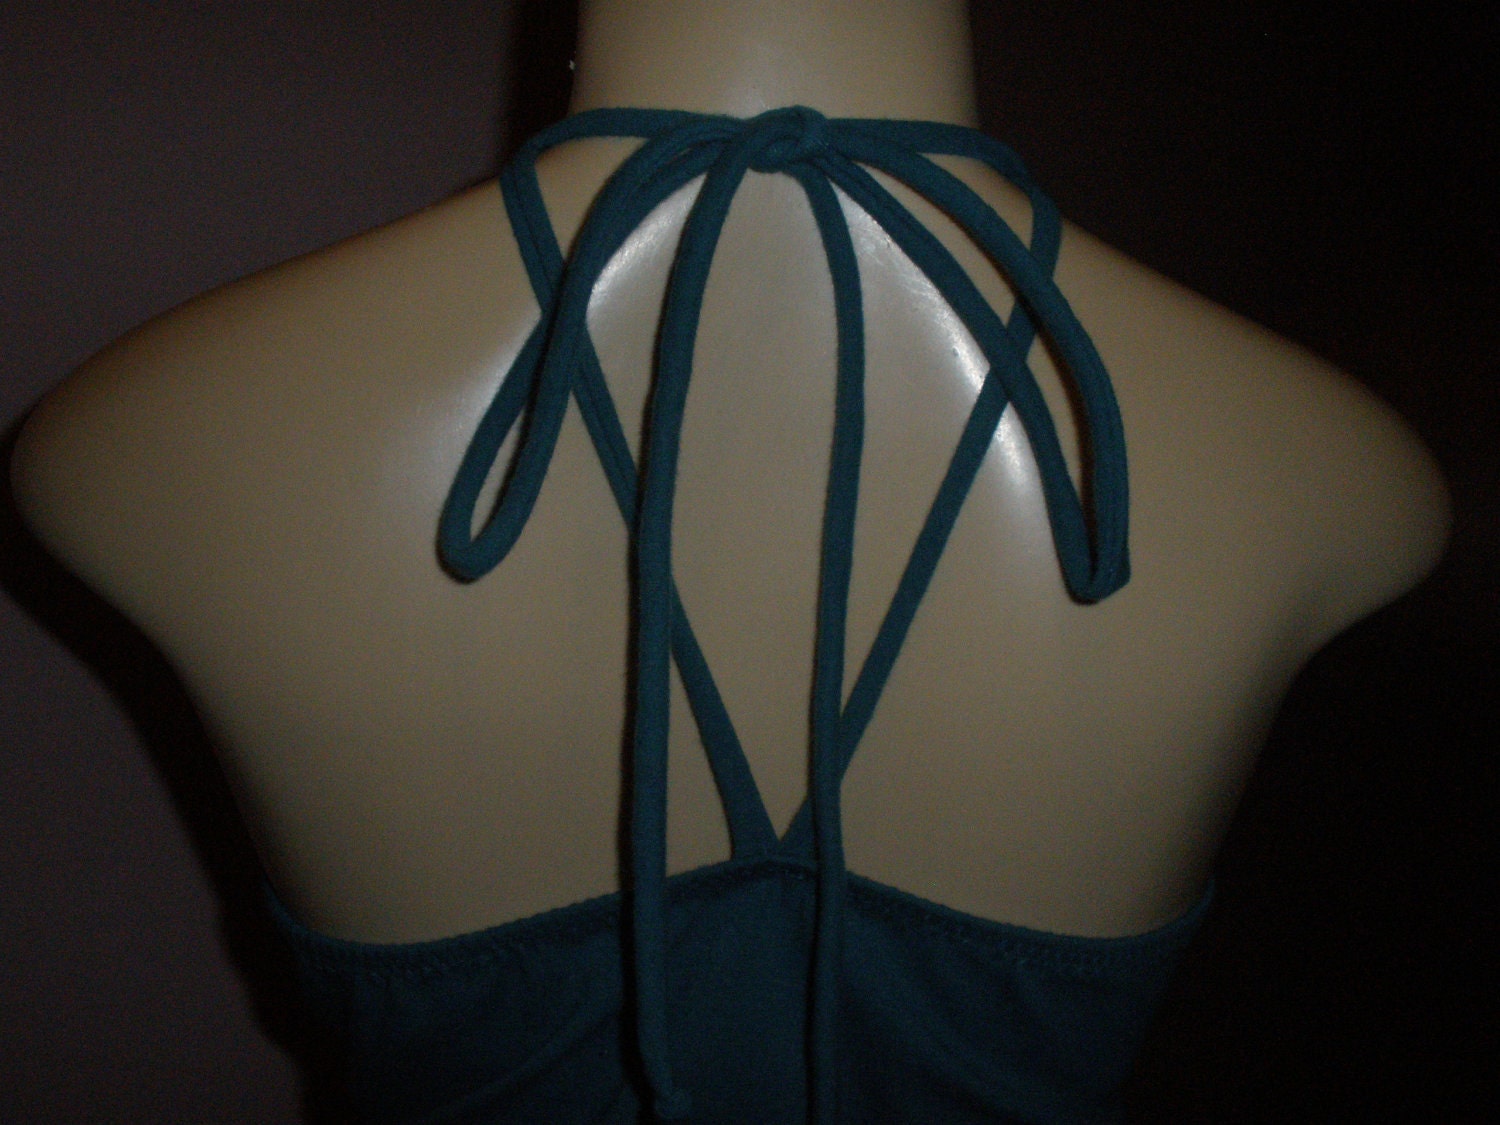 Cute Teal Color Tie String Womens Tank Top Fits Size Large and XLarge Also Multiple Ways to Tie Strings